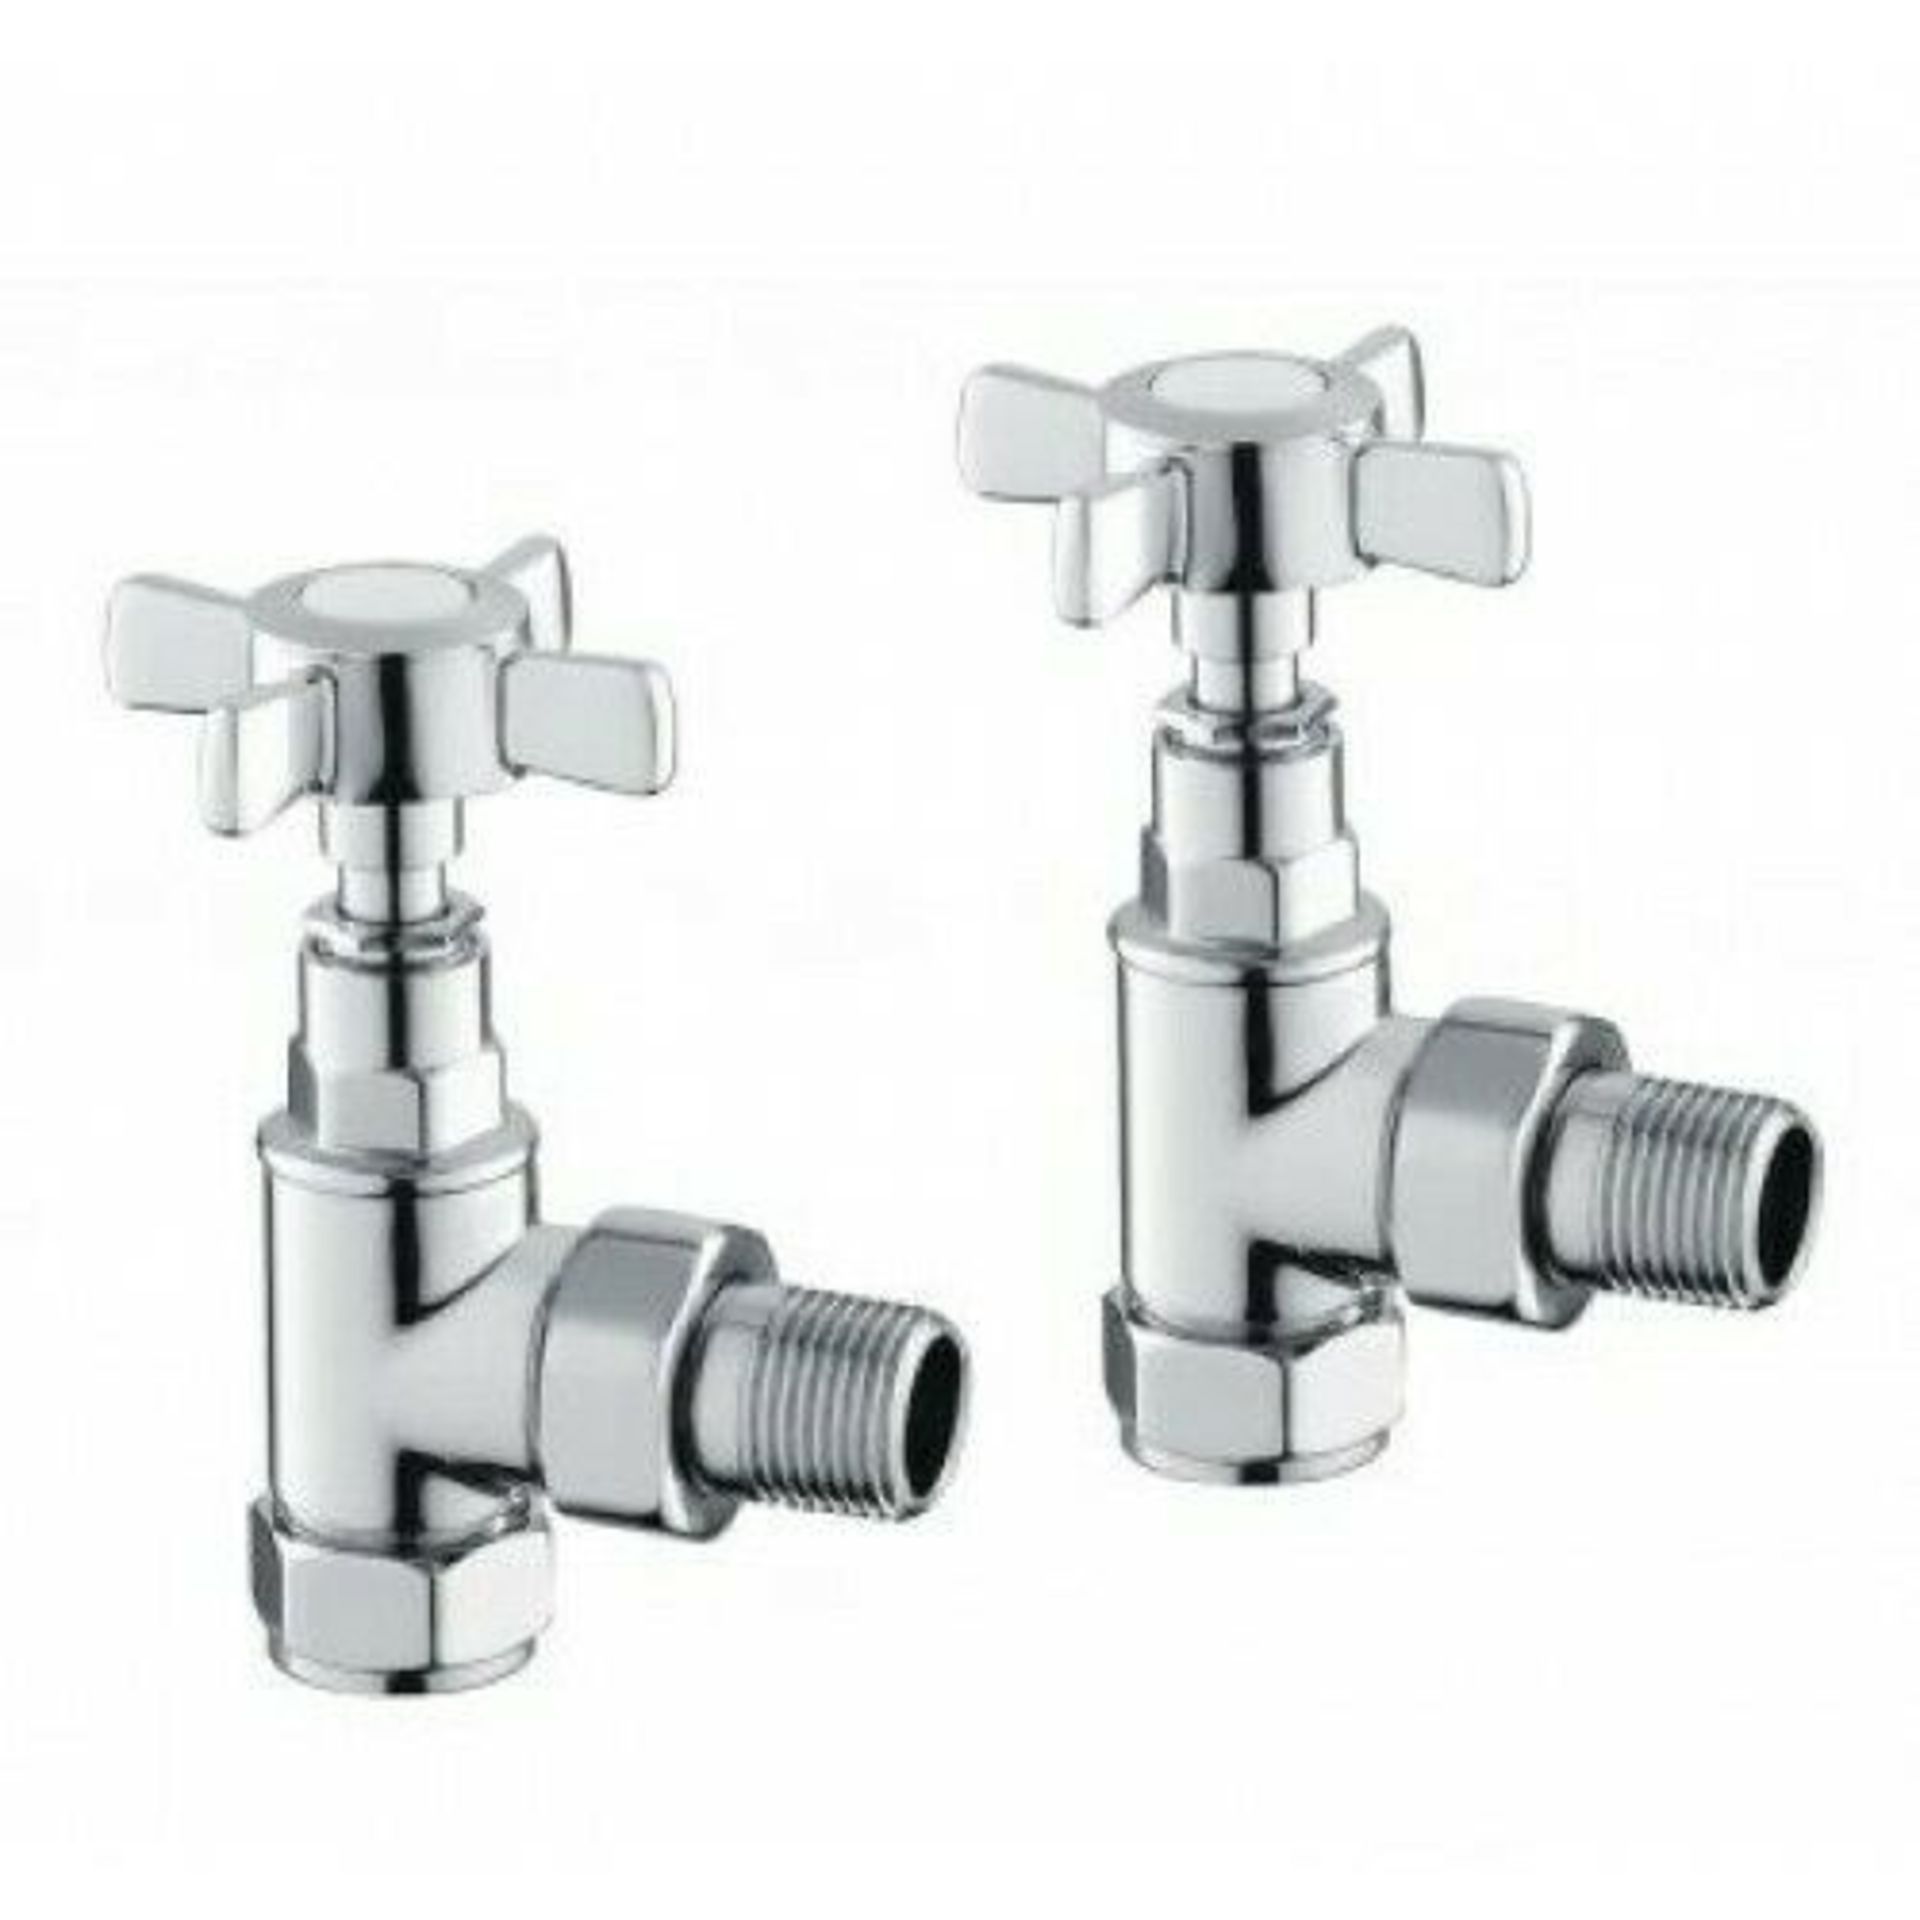 Traditional Angled Heated Towel Rail Radiator Valves Cross Head Pair 15mm Manual. For those ... - Image 2 of 2